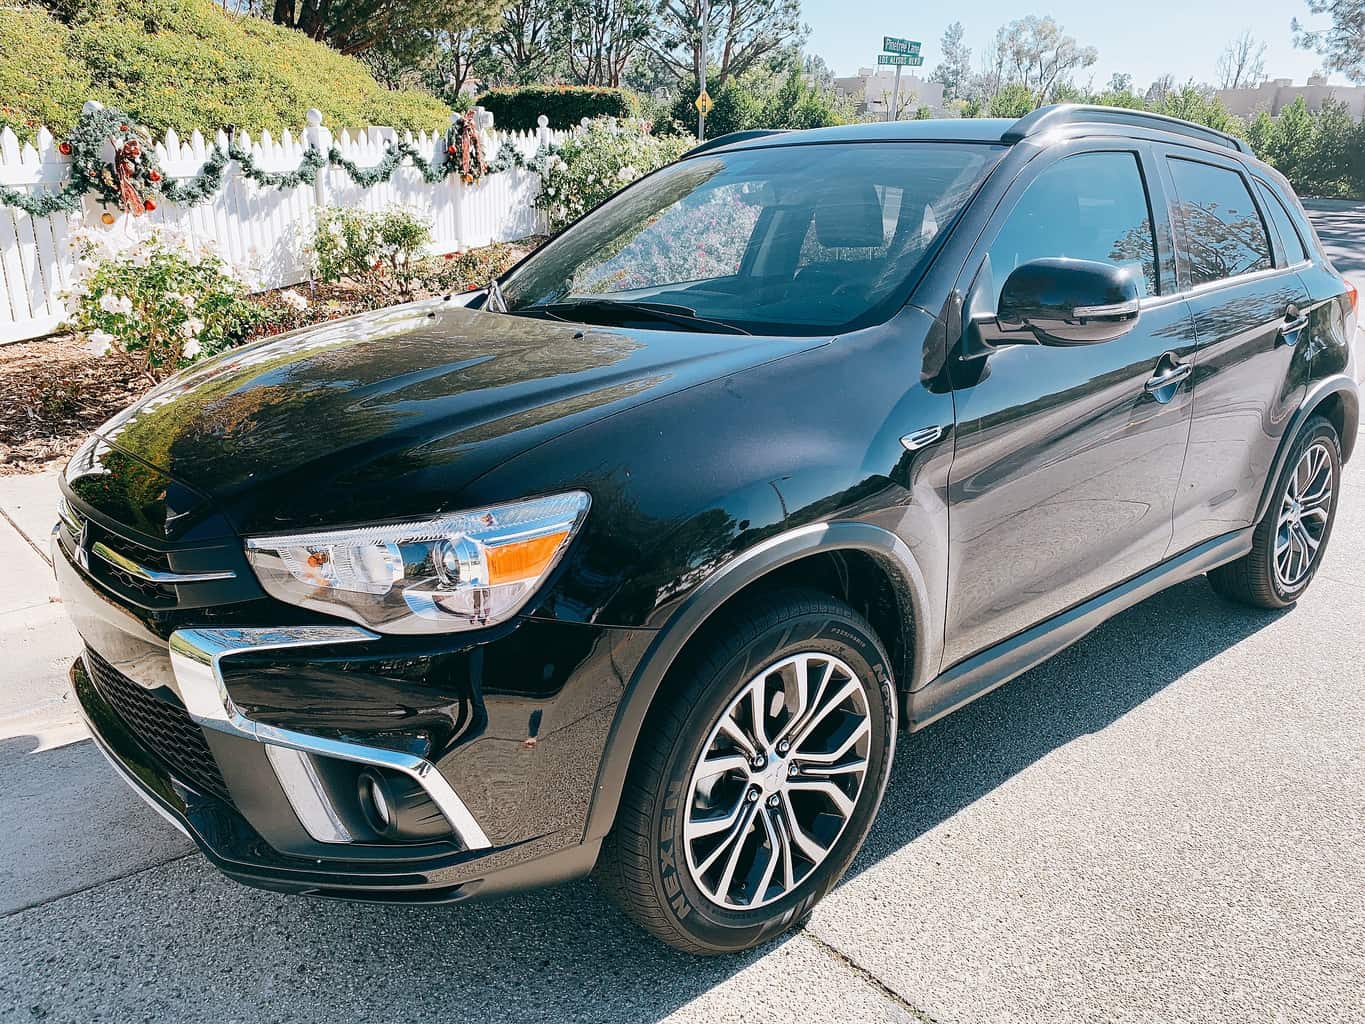 he 2019 Outlander Sport is a compact crossover that combines the versatility to carry people or cargo at an affordable price and had an EPA-estimated 30 mpg on the highway / 24 mpg in the city.